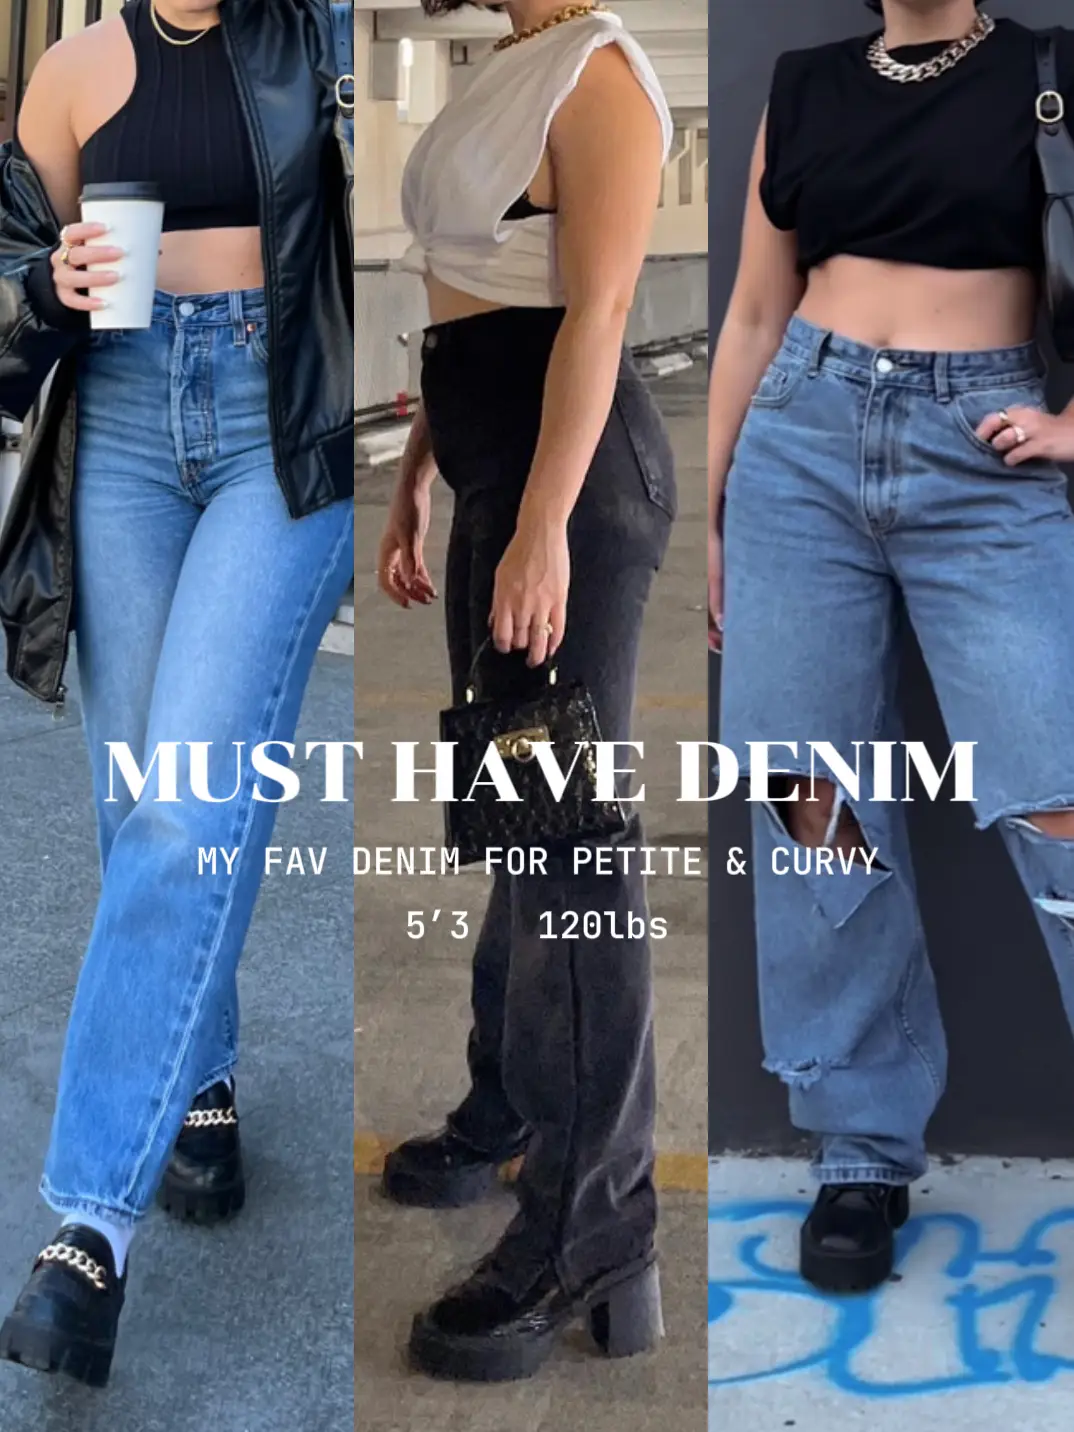 Jeans I Have Tried as a Size 14/16 - Curvy Denim Reviews